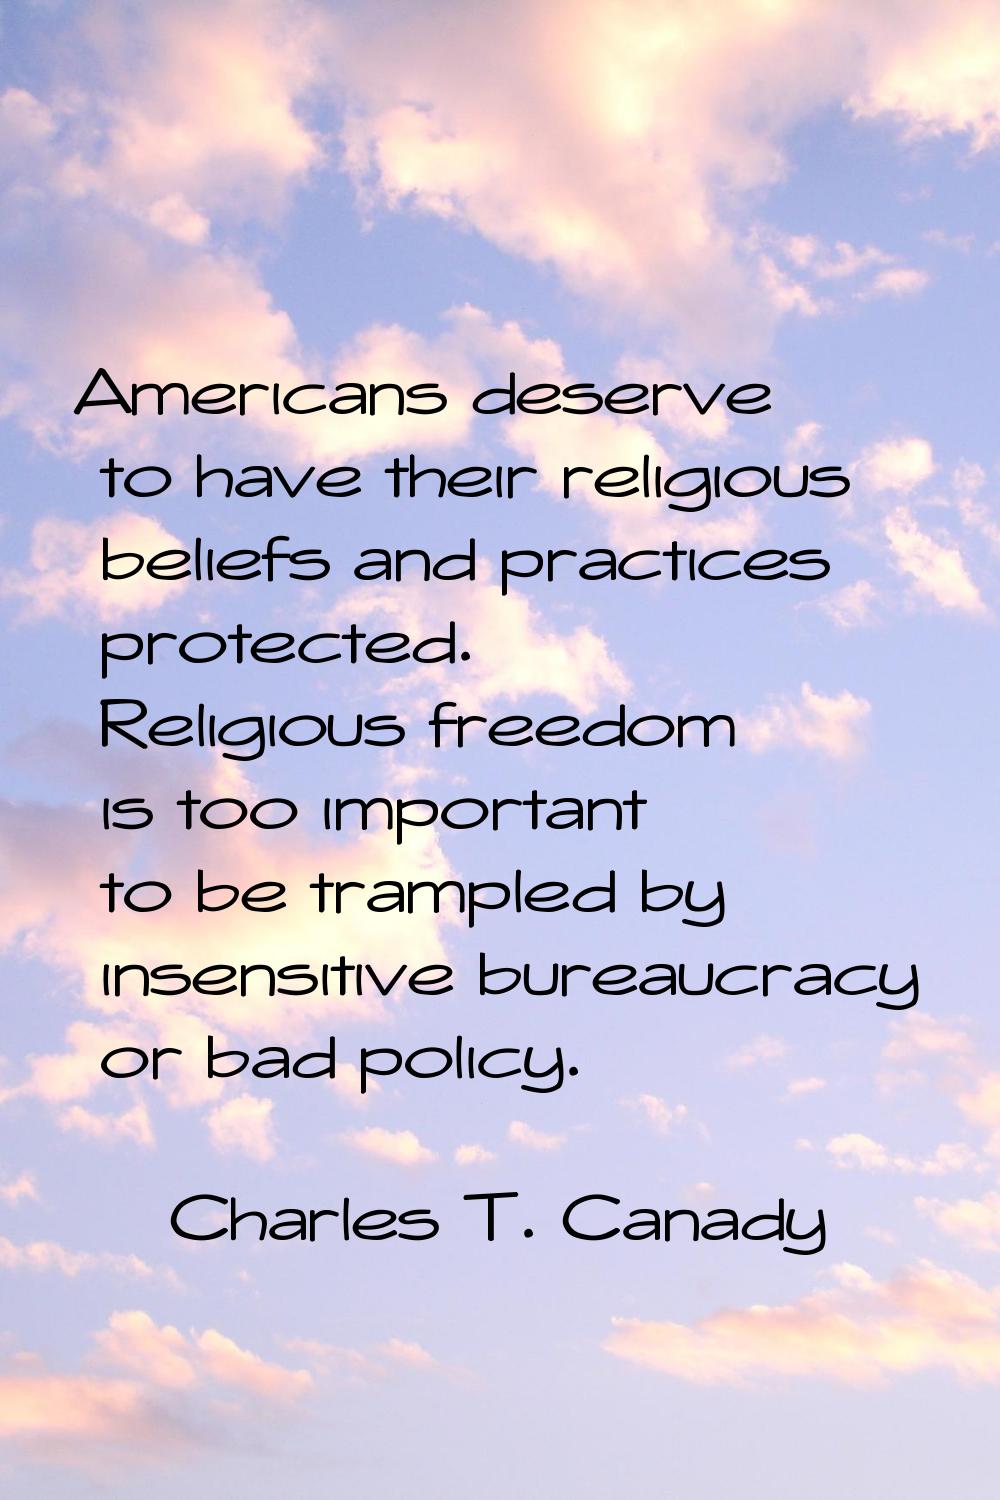 Americans deserve to have their religious beliefs and practices protected. Religious freedom is too